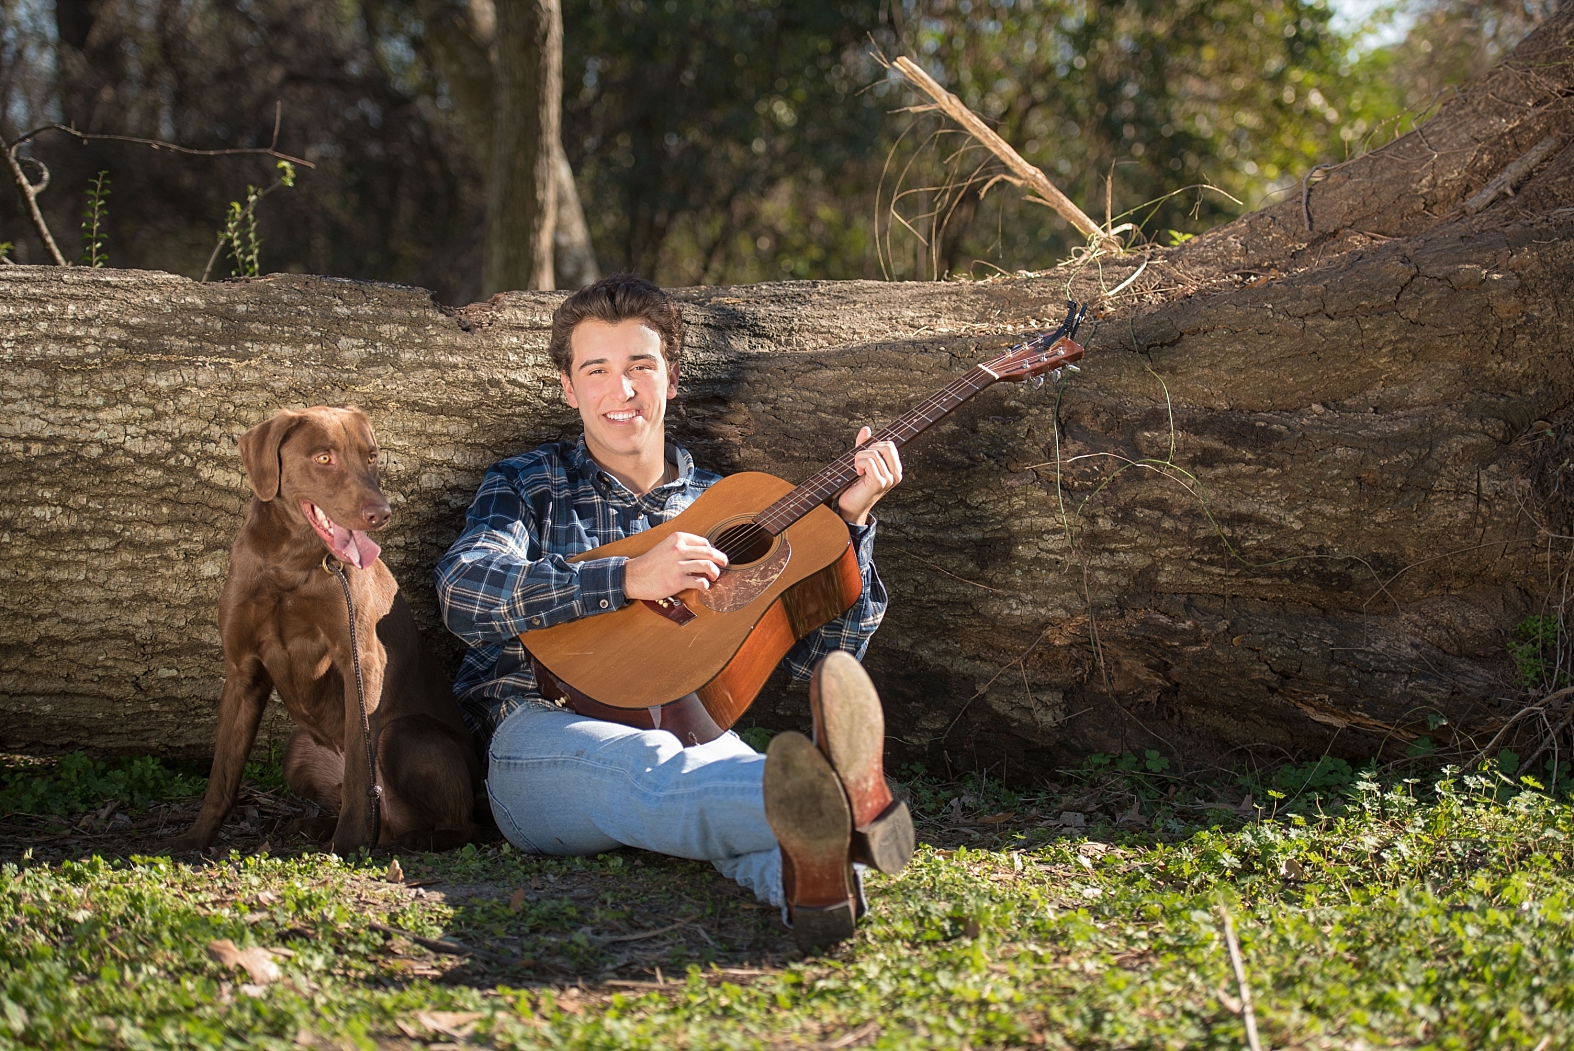 A senior session with his dog